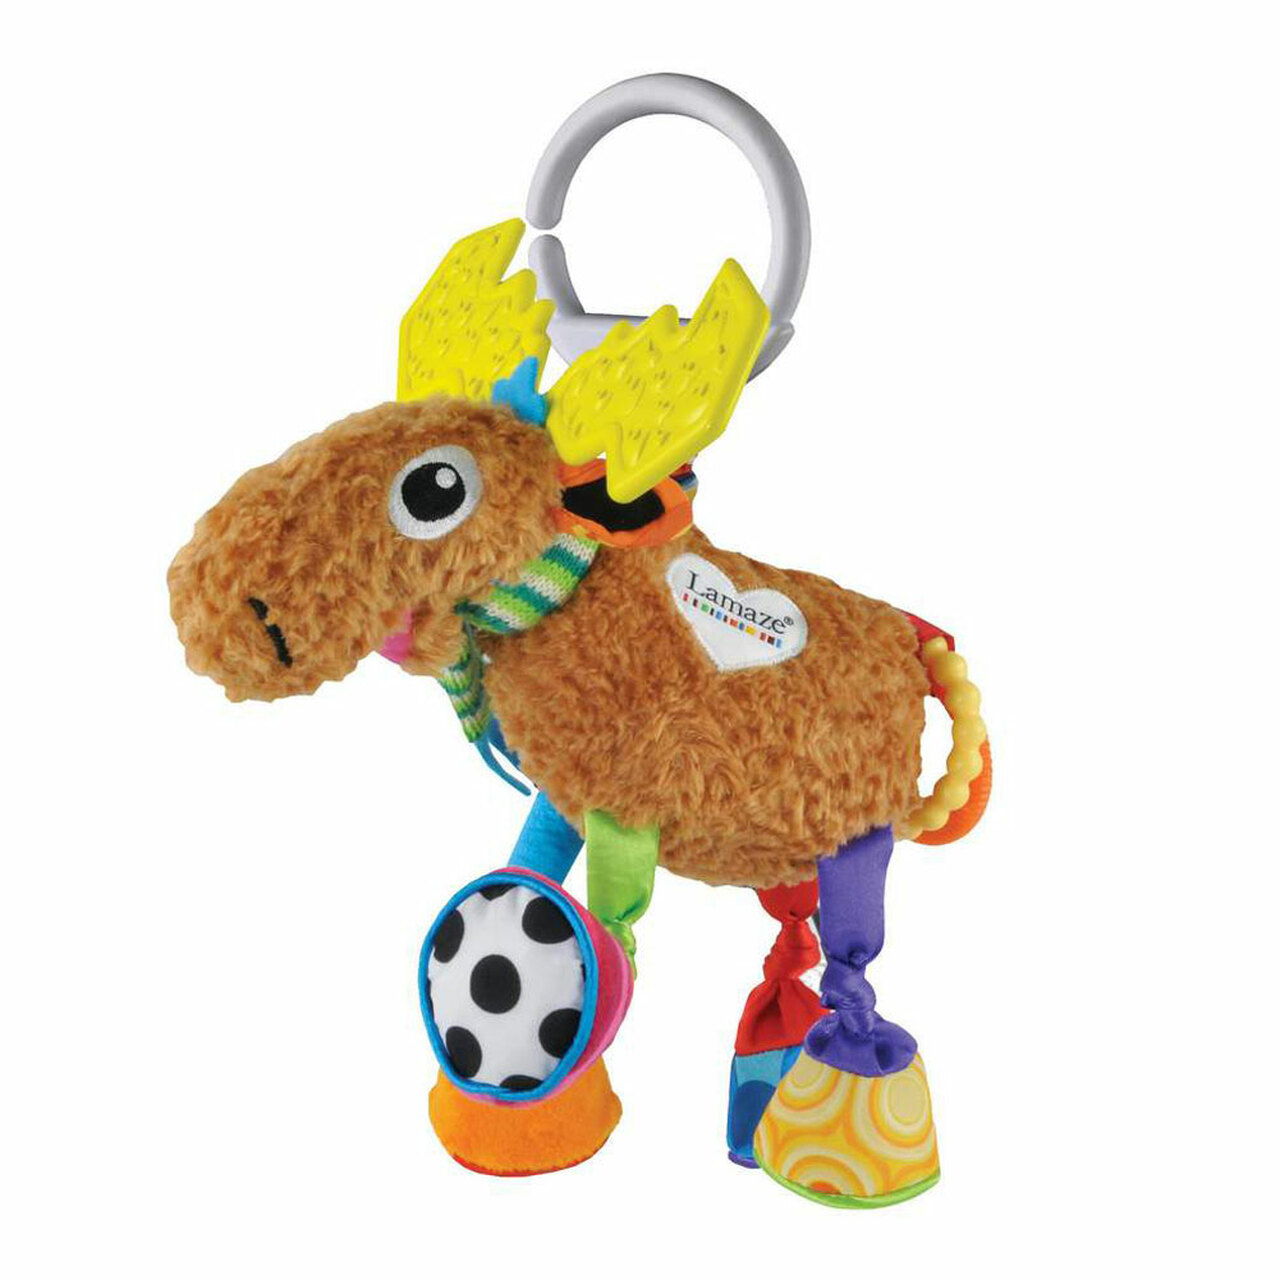 Lamaze Mortimer the Moose Toy | Moose toys, Stroller toys, Baby toys